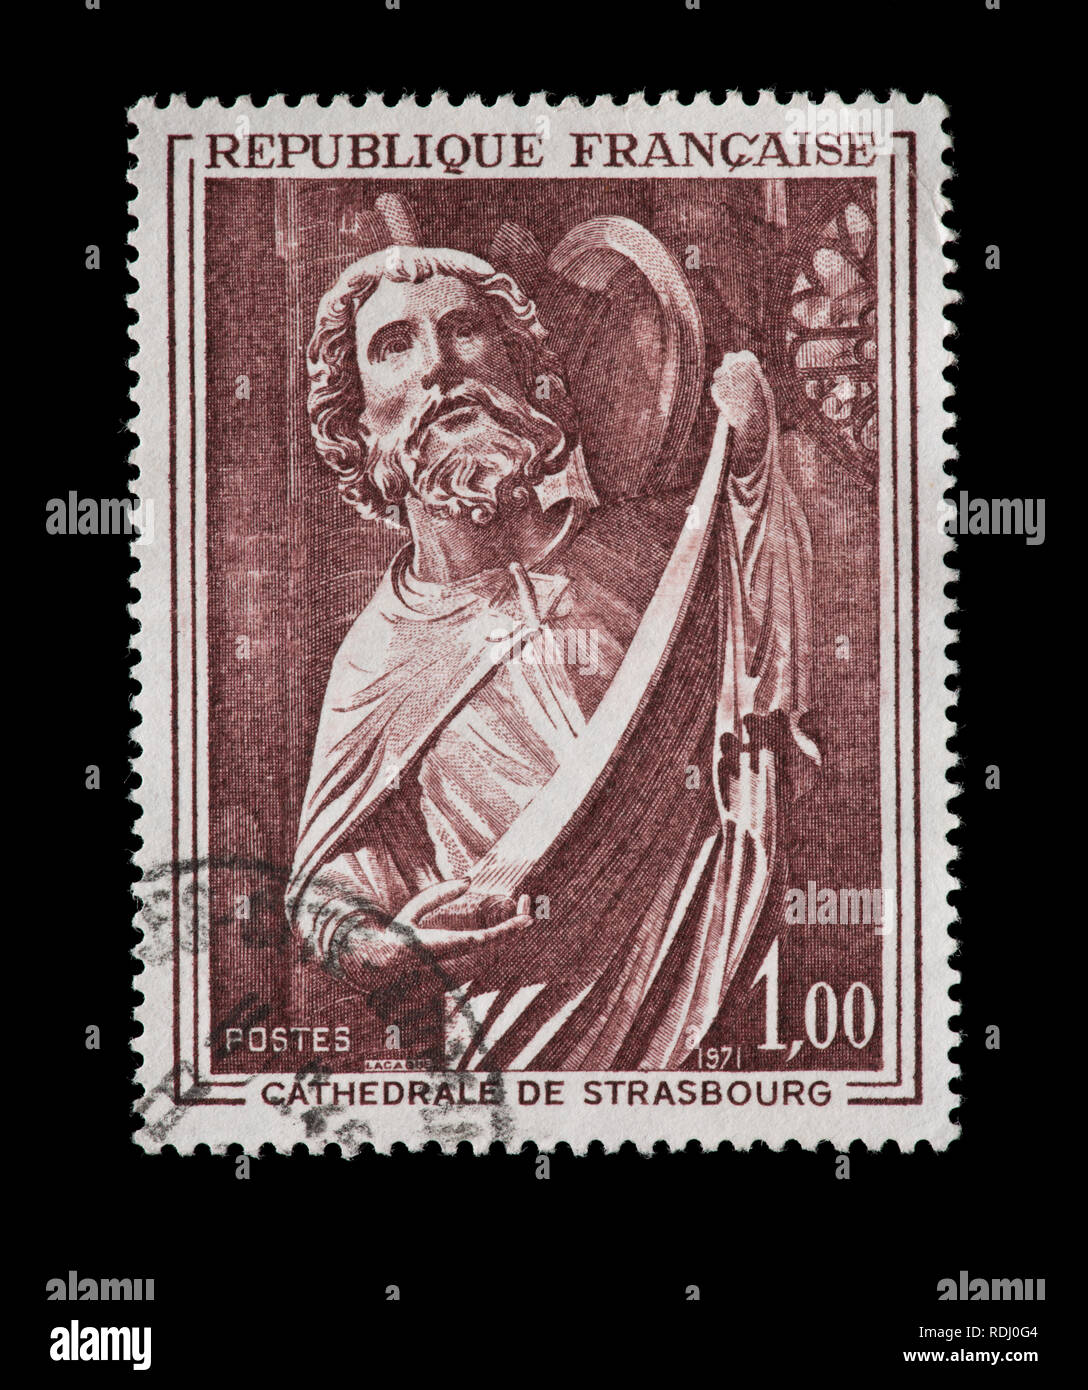 Postage stamp from France depicting a sculpture of St.Matthew from Strasbourg Castle. Stock Photo